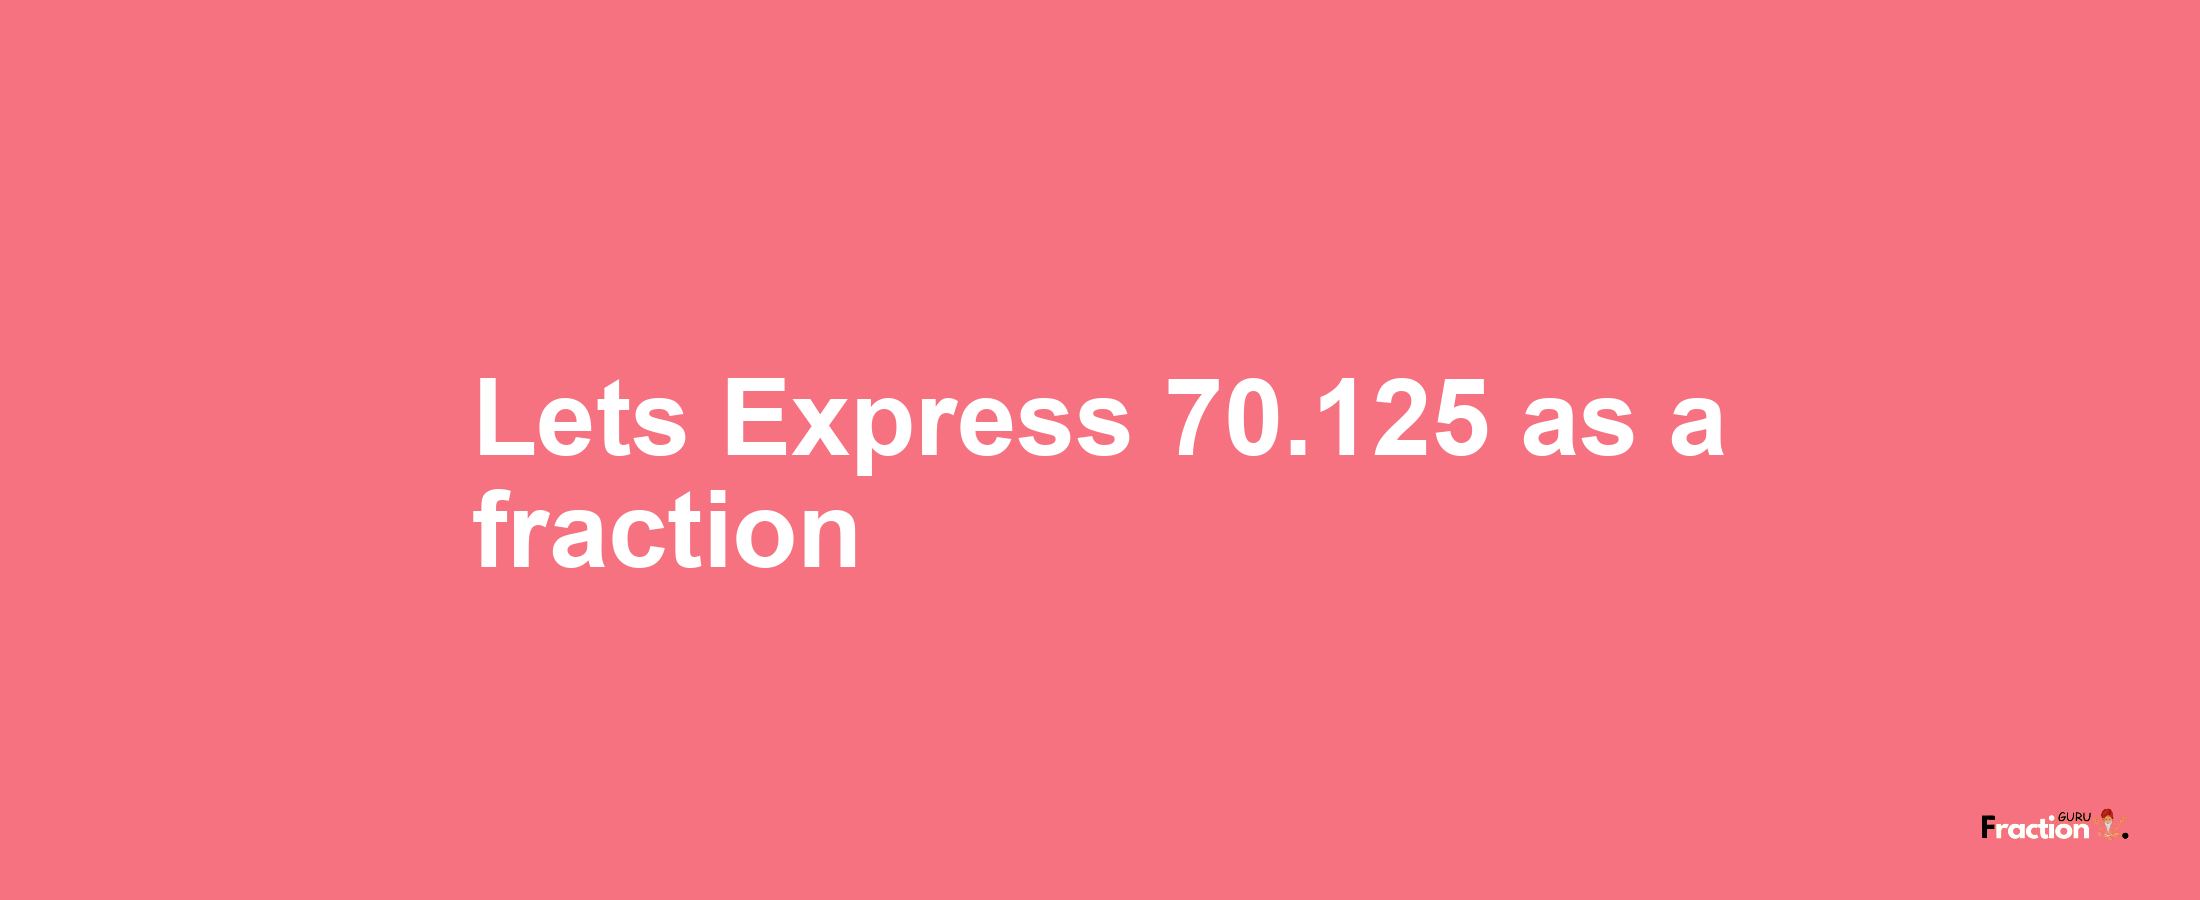 Lets Express 70.125 as afraction